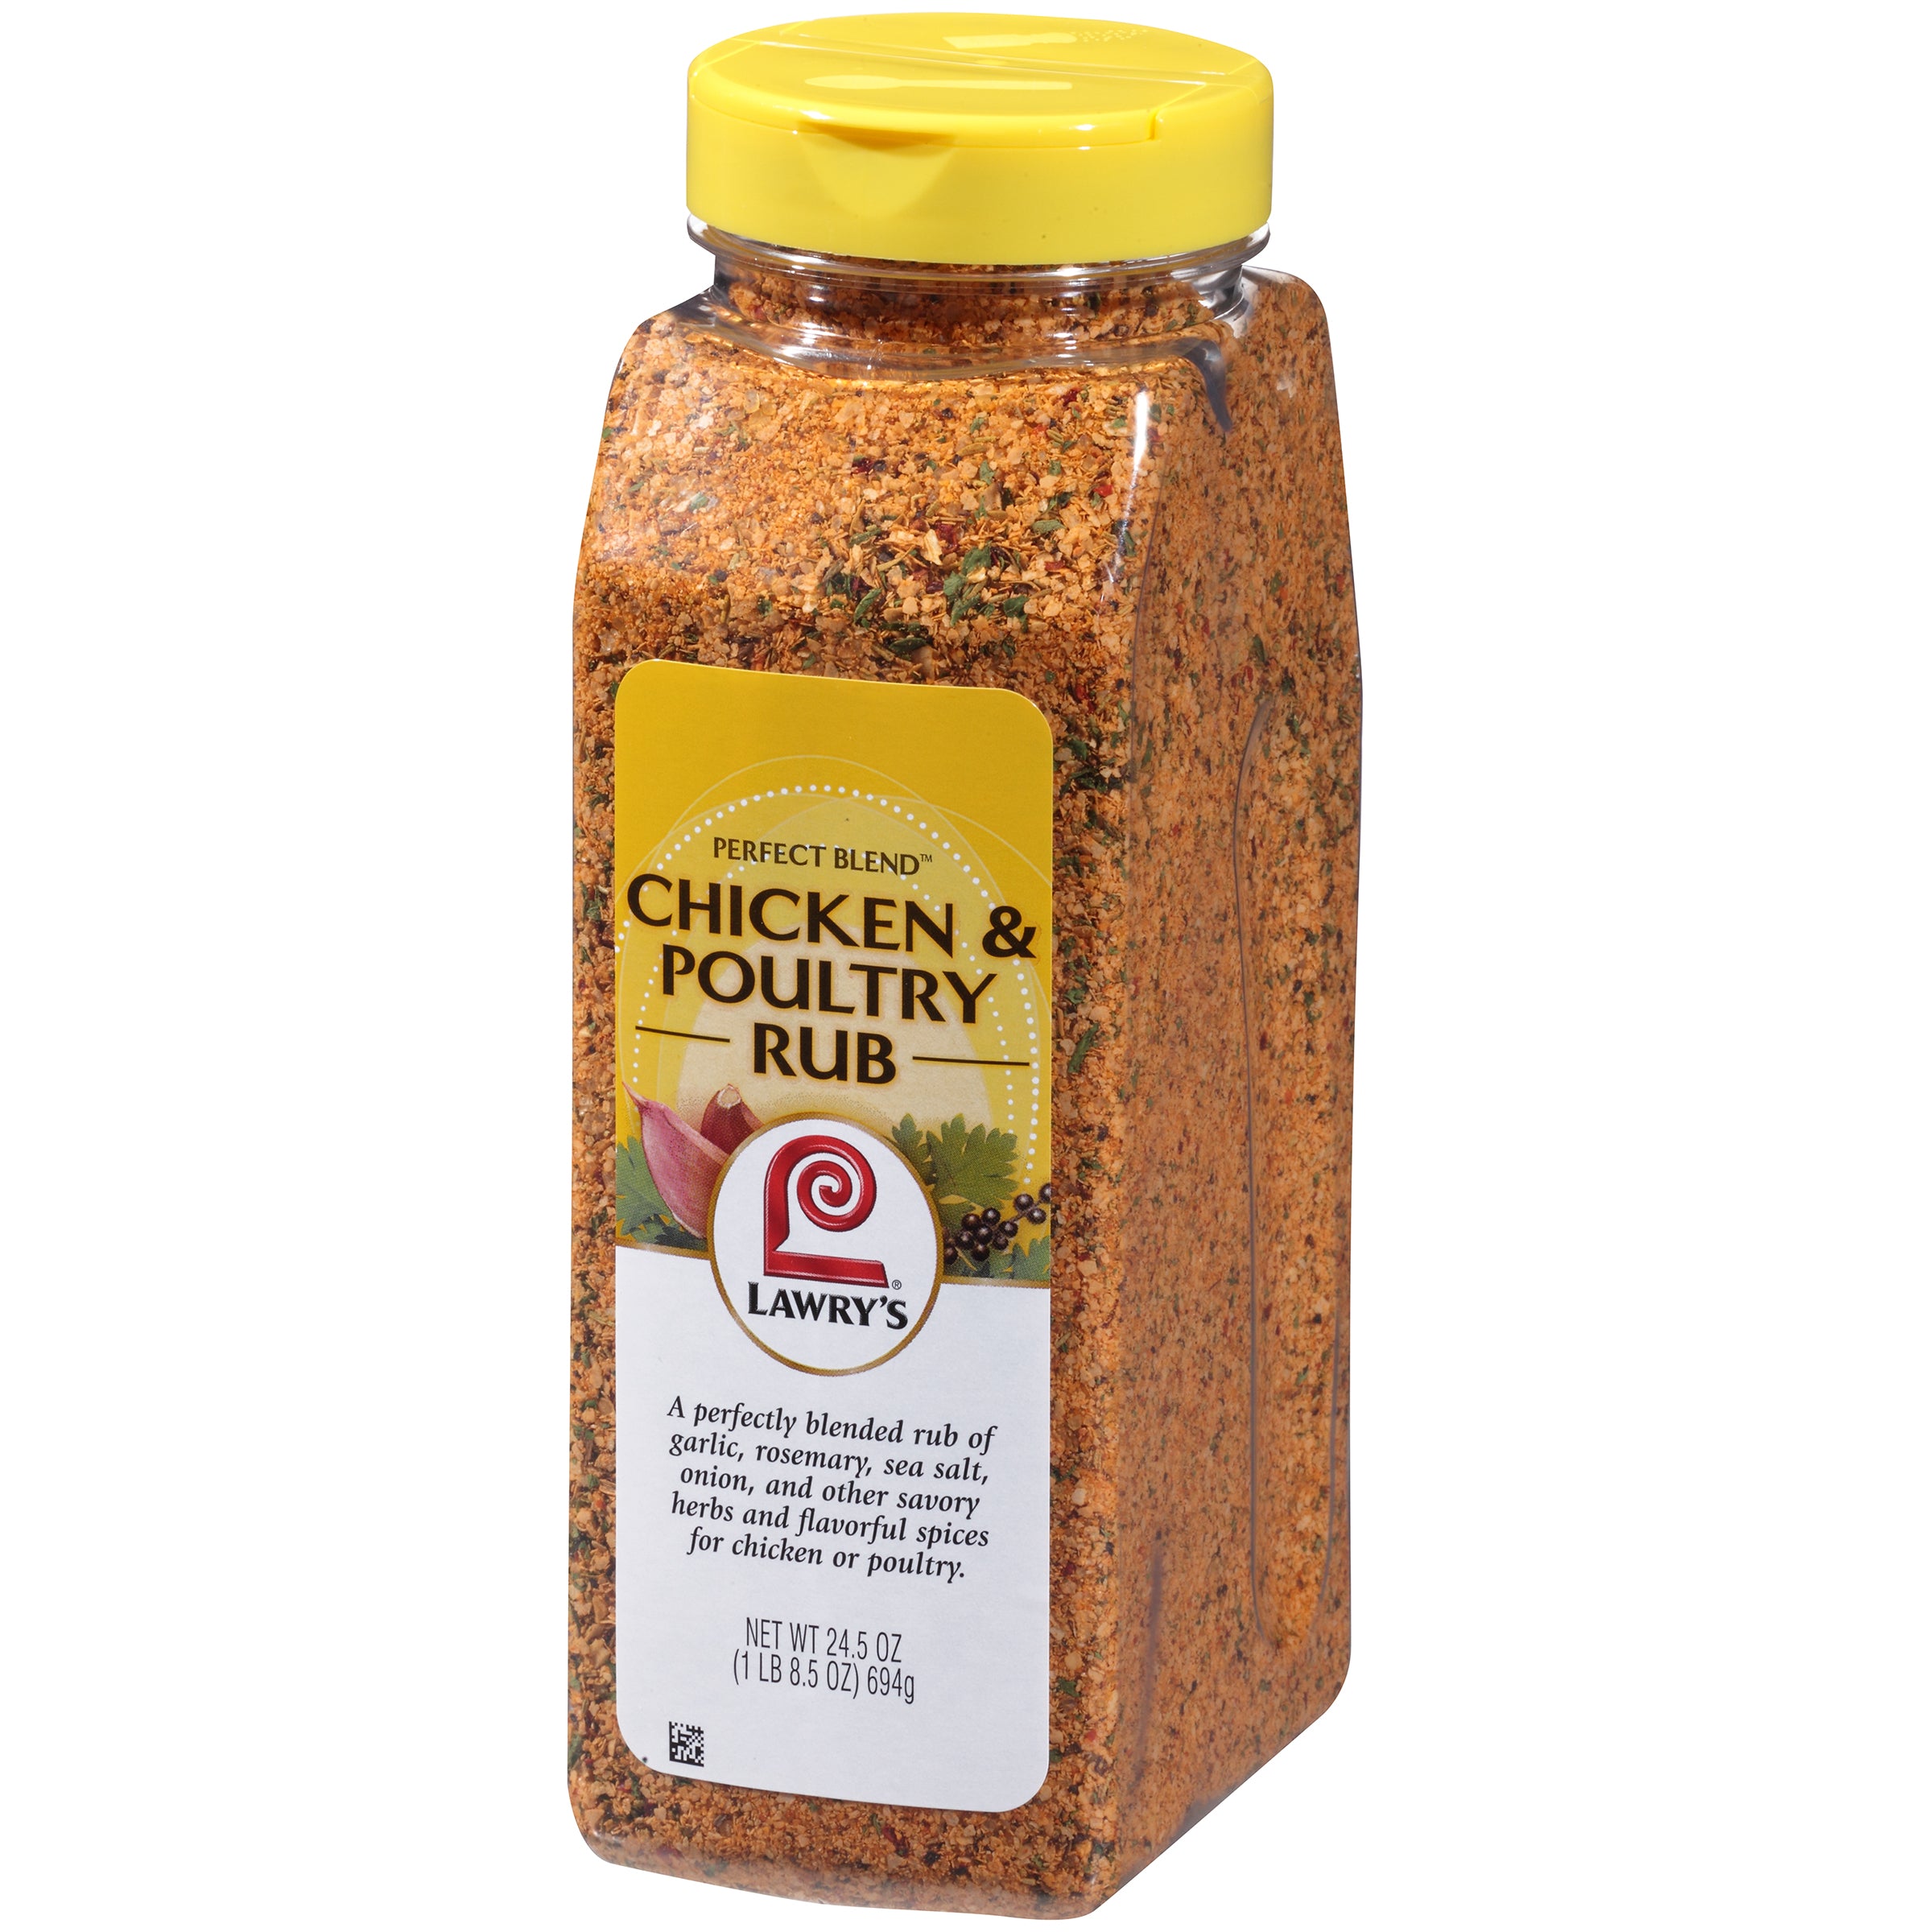 Stubb's Chicken, Spicy Rub: Calories, Nutrition Analysis & More